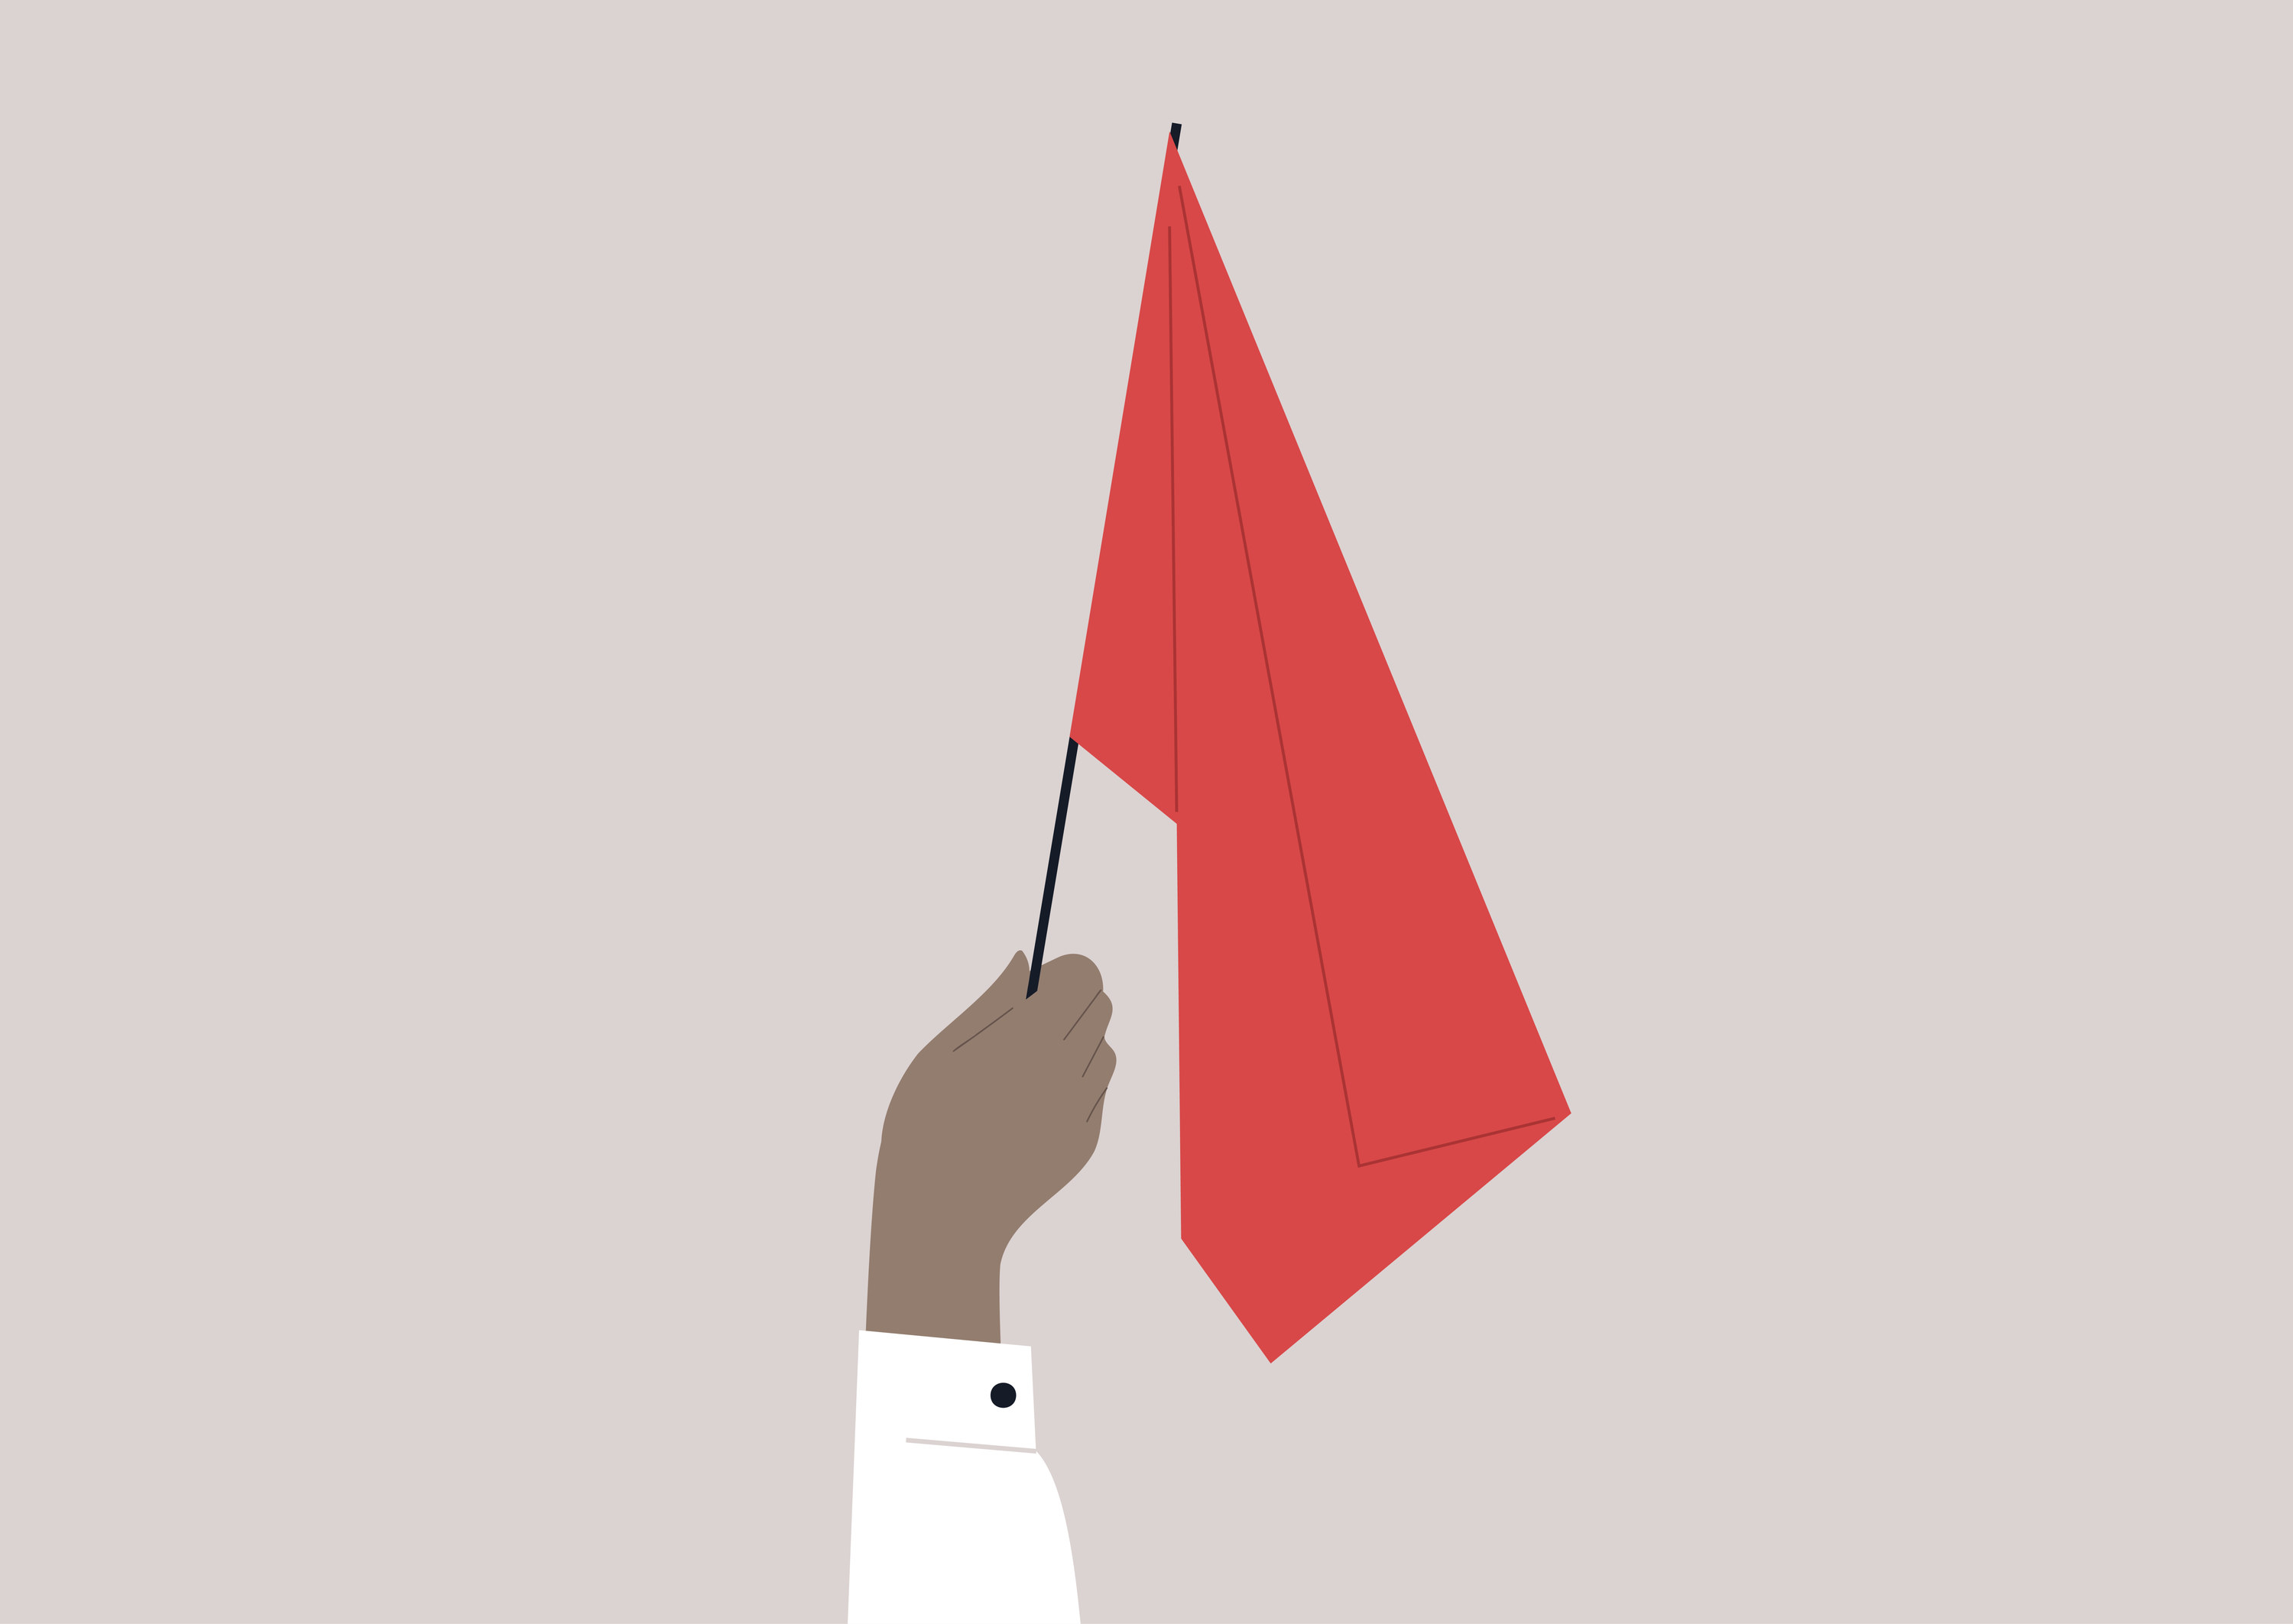 An illustration of someone holding up a red flag